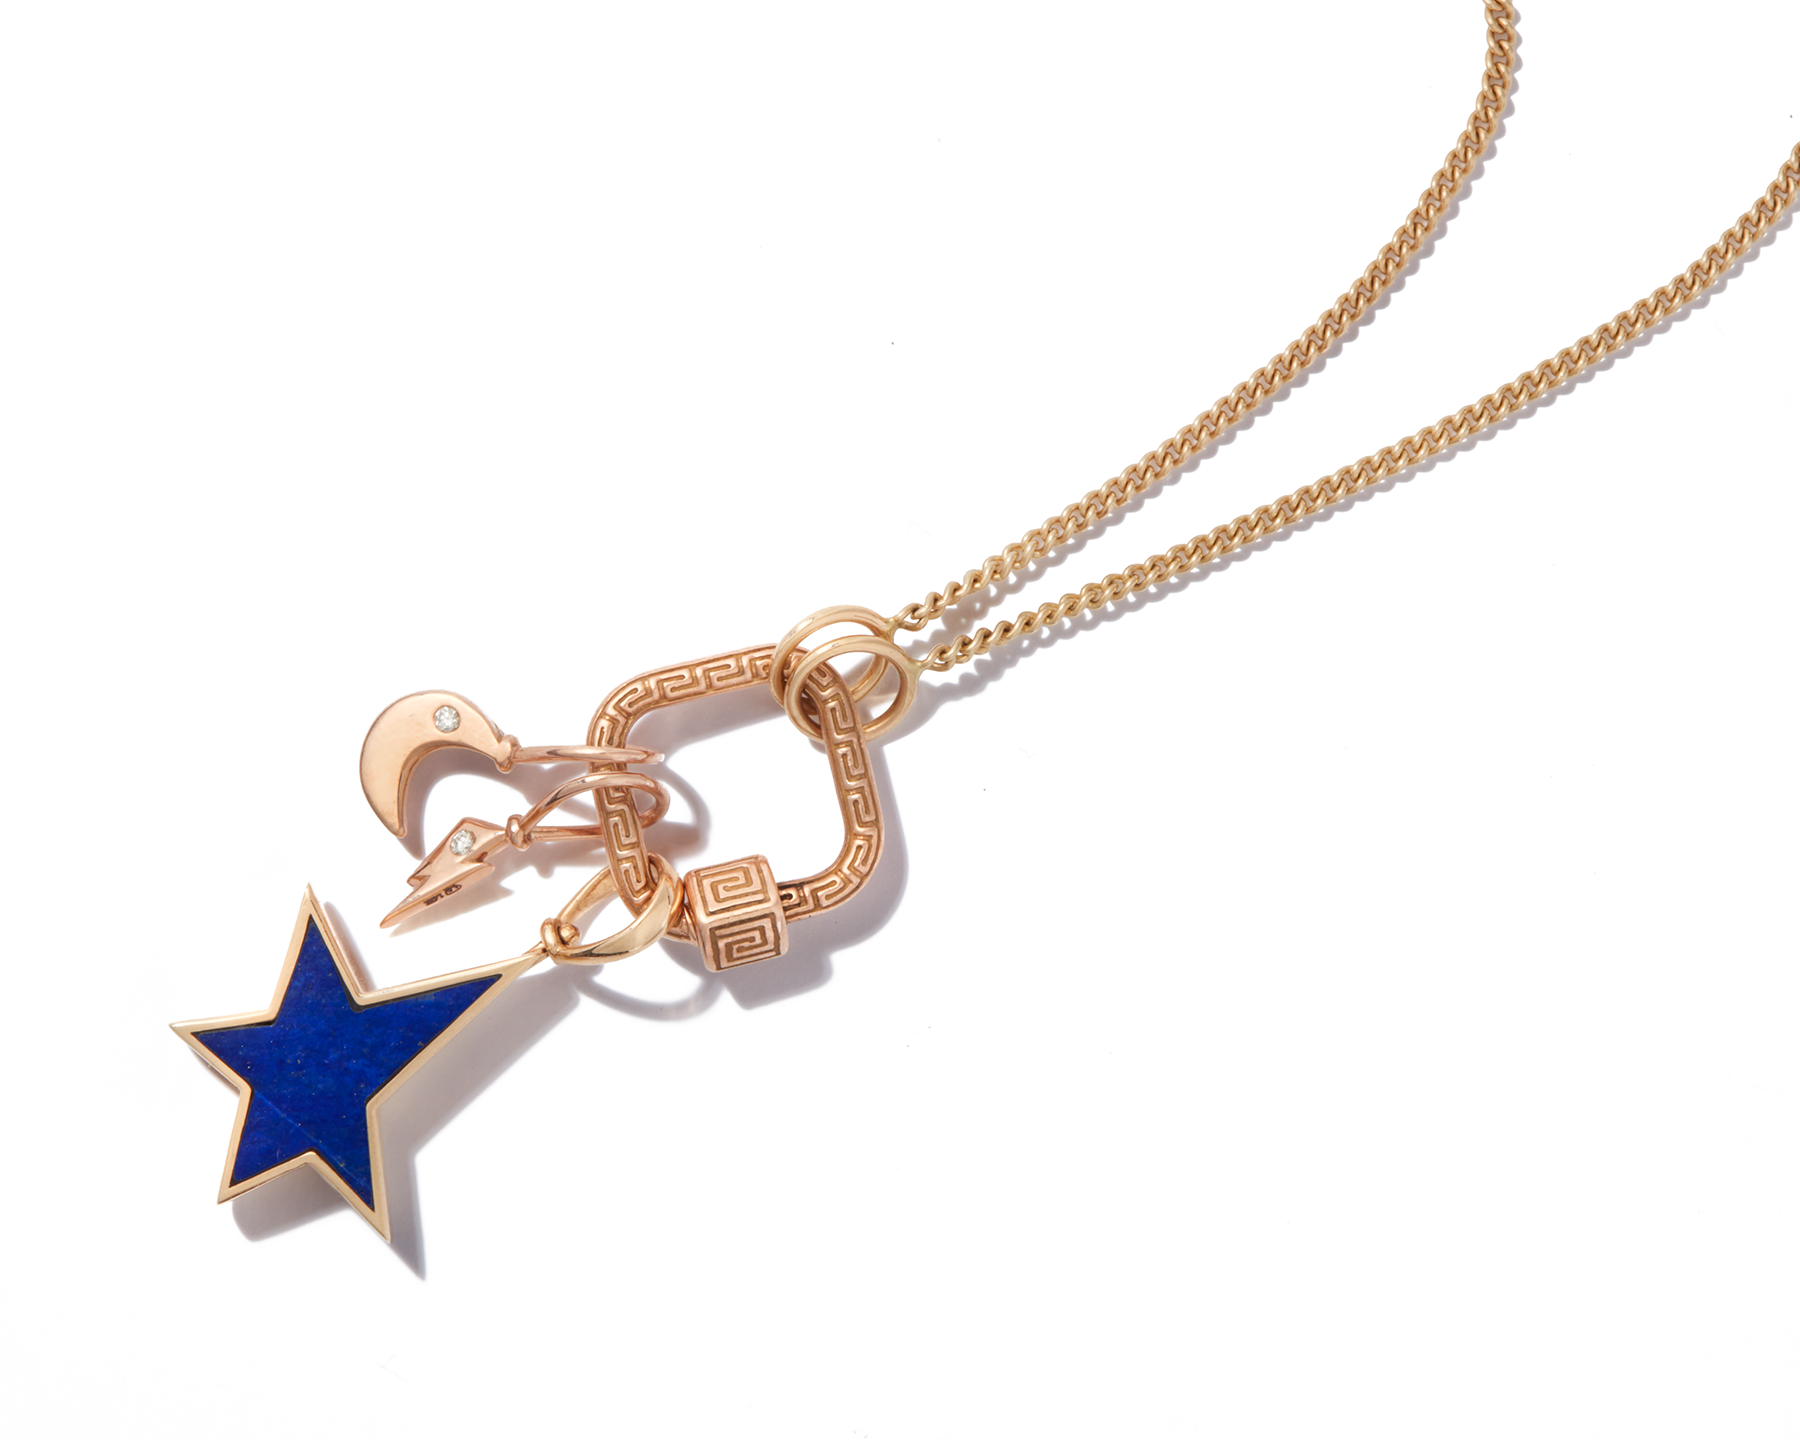 Necklace with Marla Aaron meander lock and blue star charm